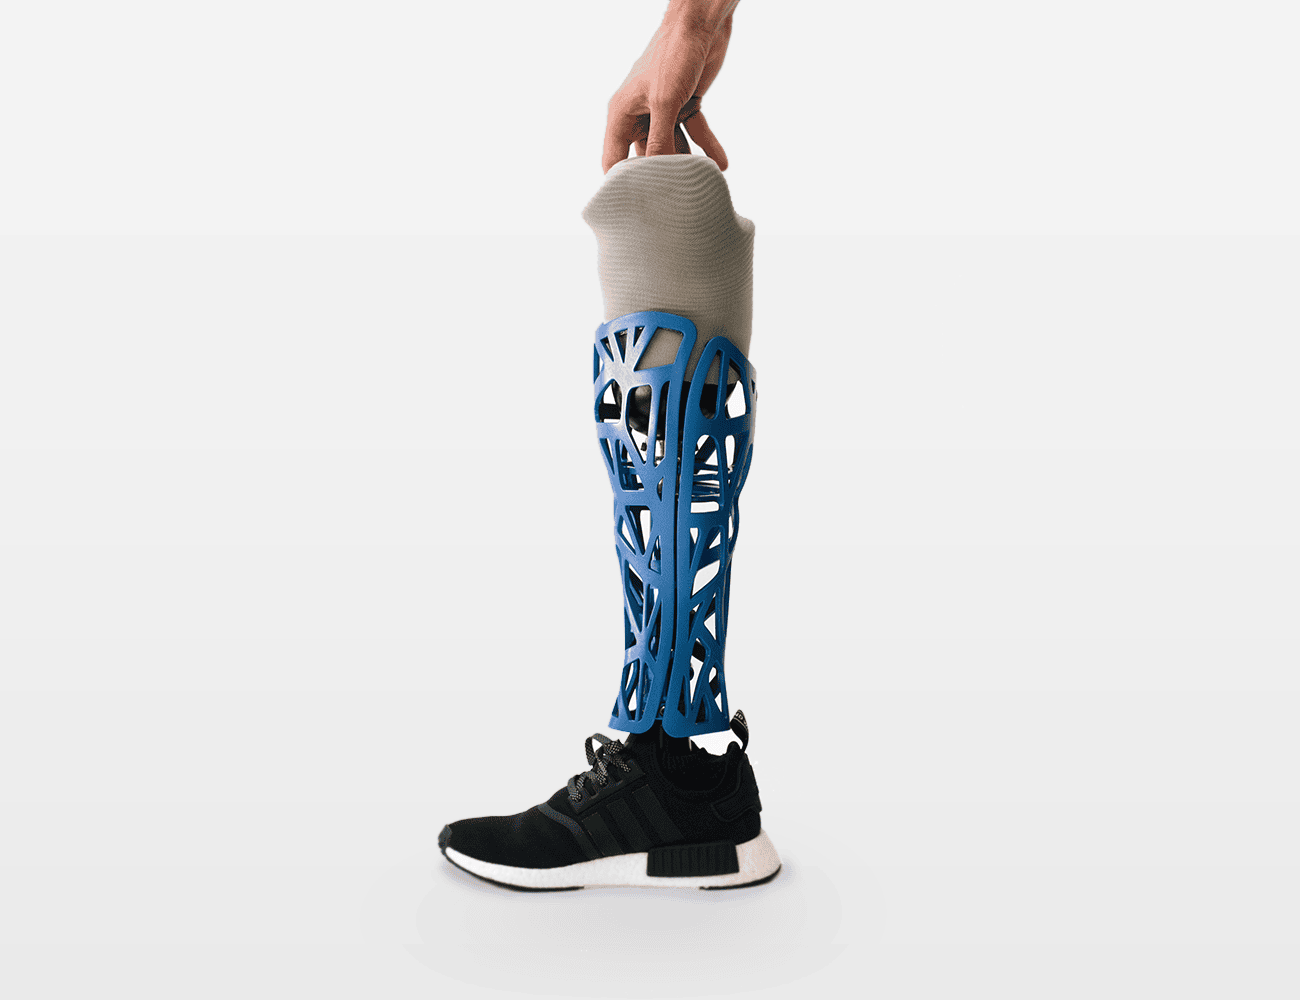 Form Prosthetic covers